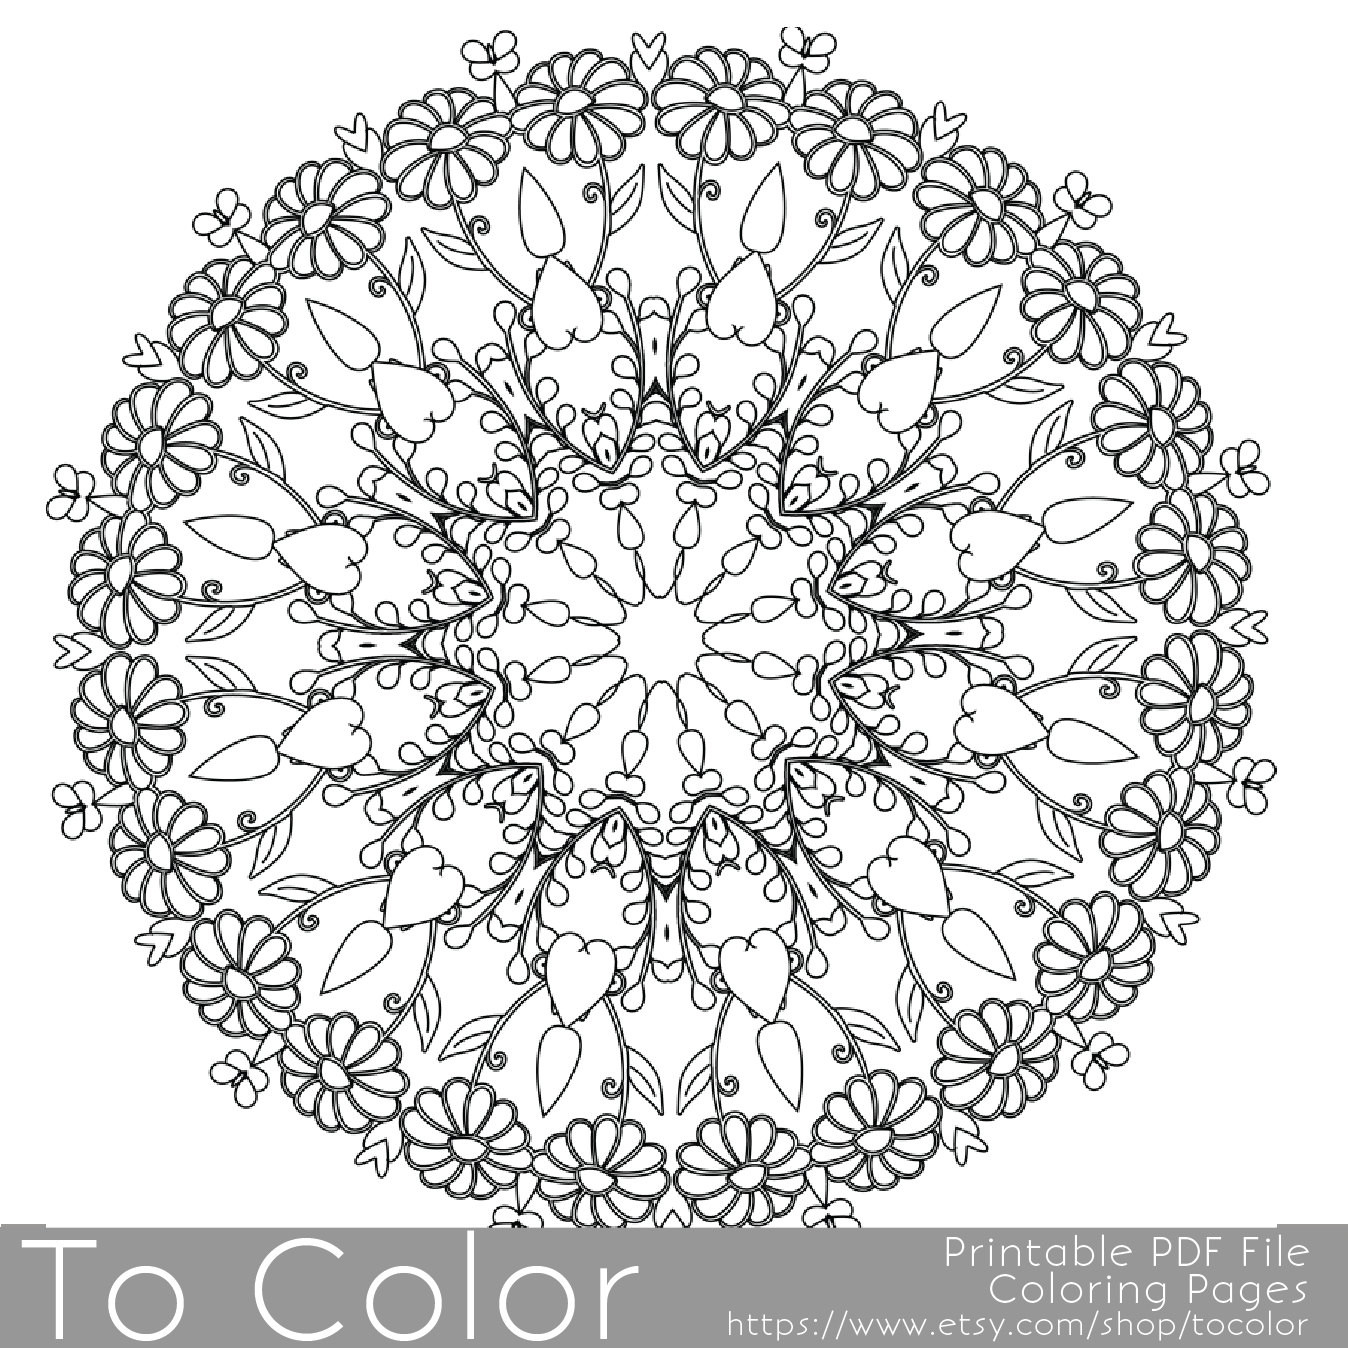 Intricate Coloring Pages For Adults
 49 Intricate Coloring Pages Adults Free Coloring Pages